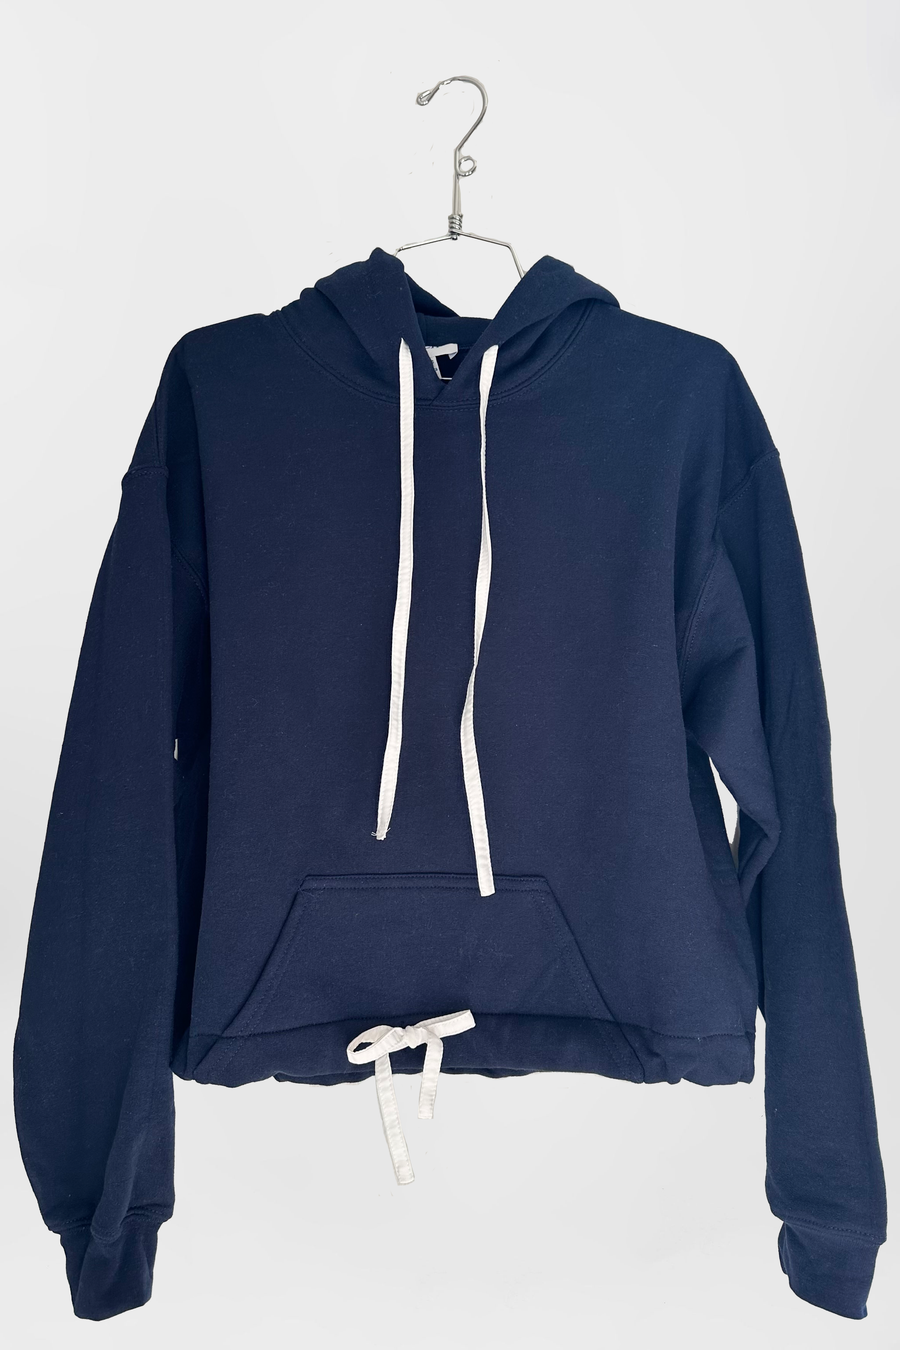 Cropped Hoodie Navy *Limited*Edition*